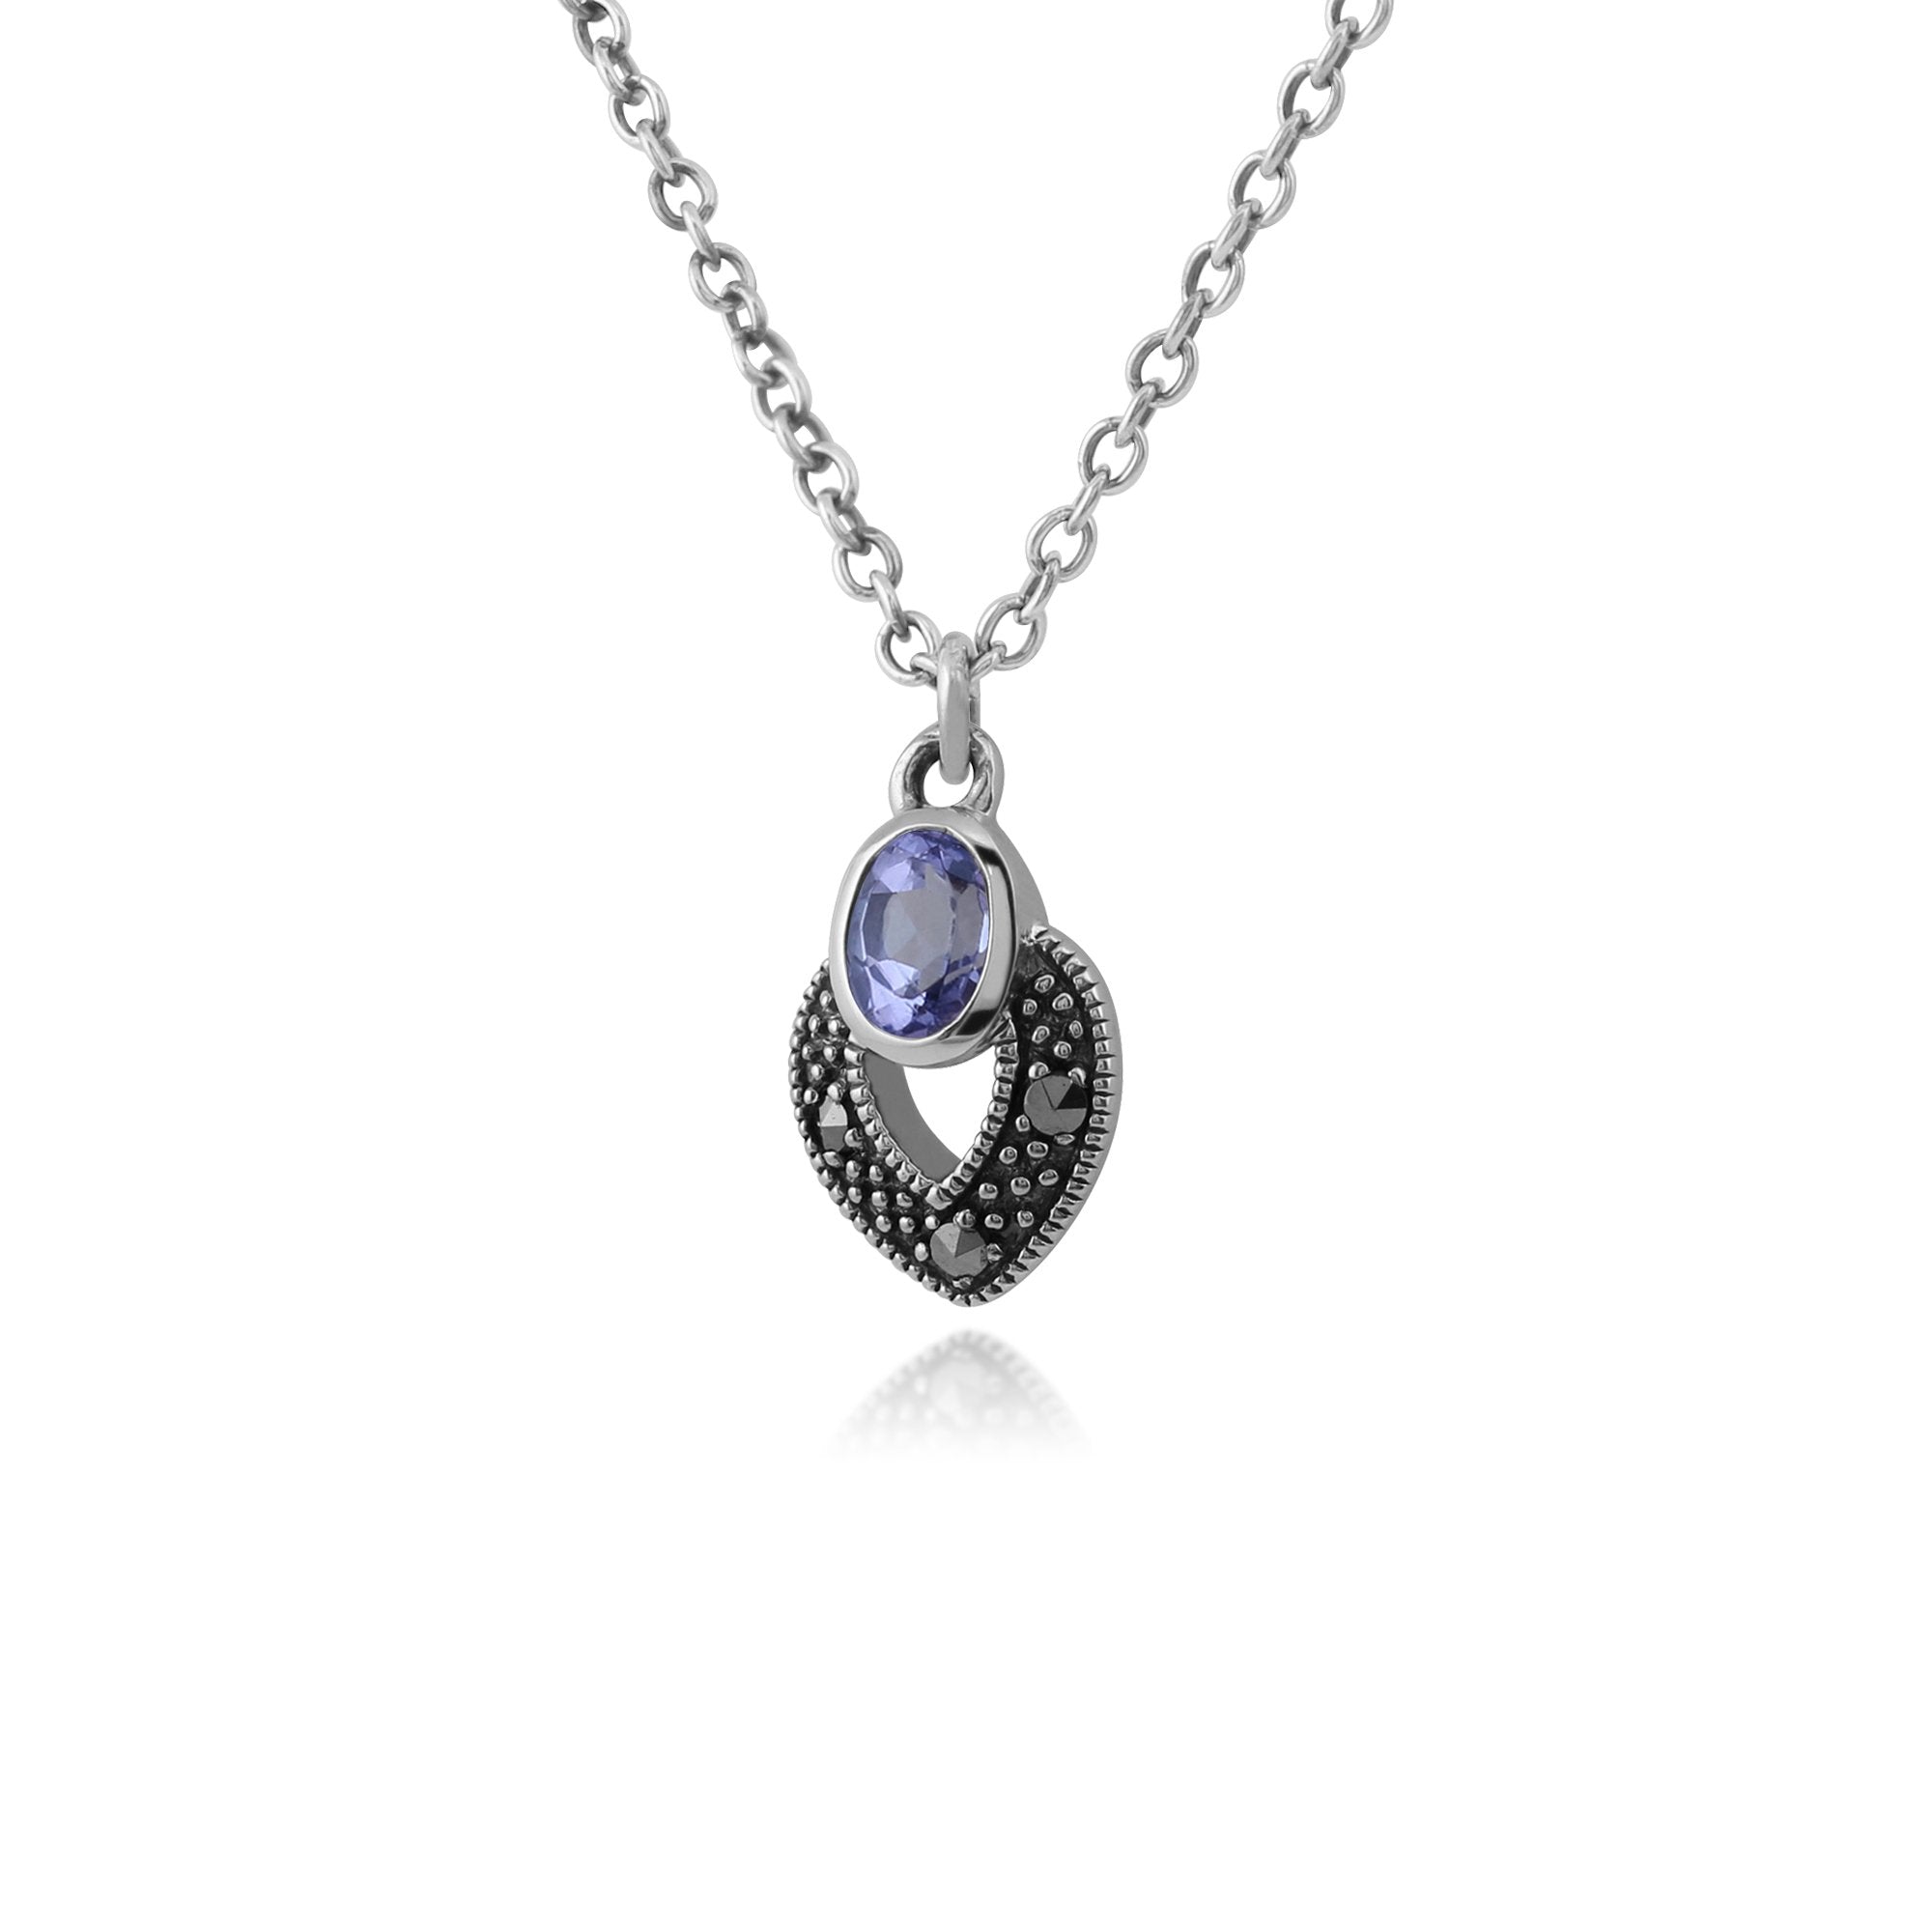 Art Deco Style Oval Tanzanite & Marcasite Necklace in 925 Sterling Silver